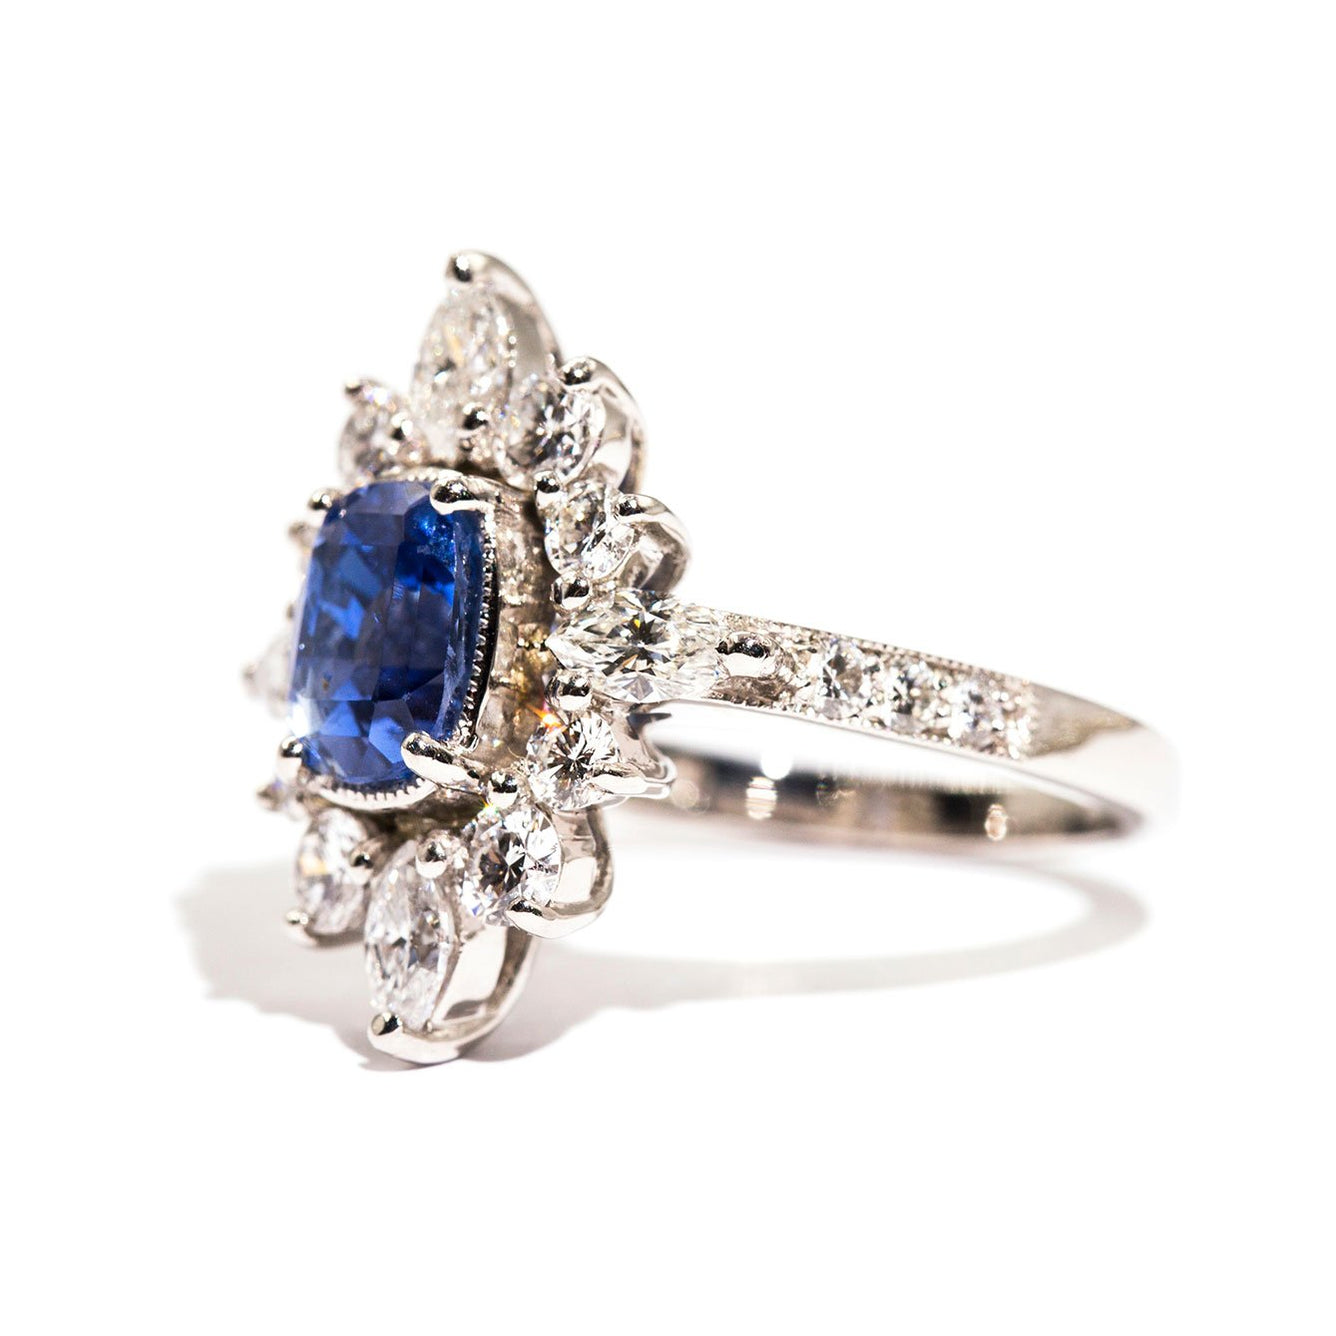 Bicheno Sapphire & Diamond Ring Ring Imperial Jewellery - Auctions, Antique, Vintage & Estate 